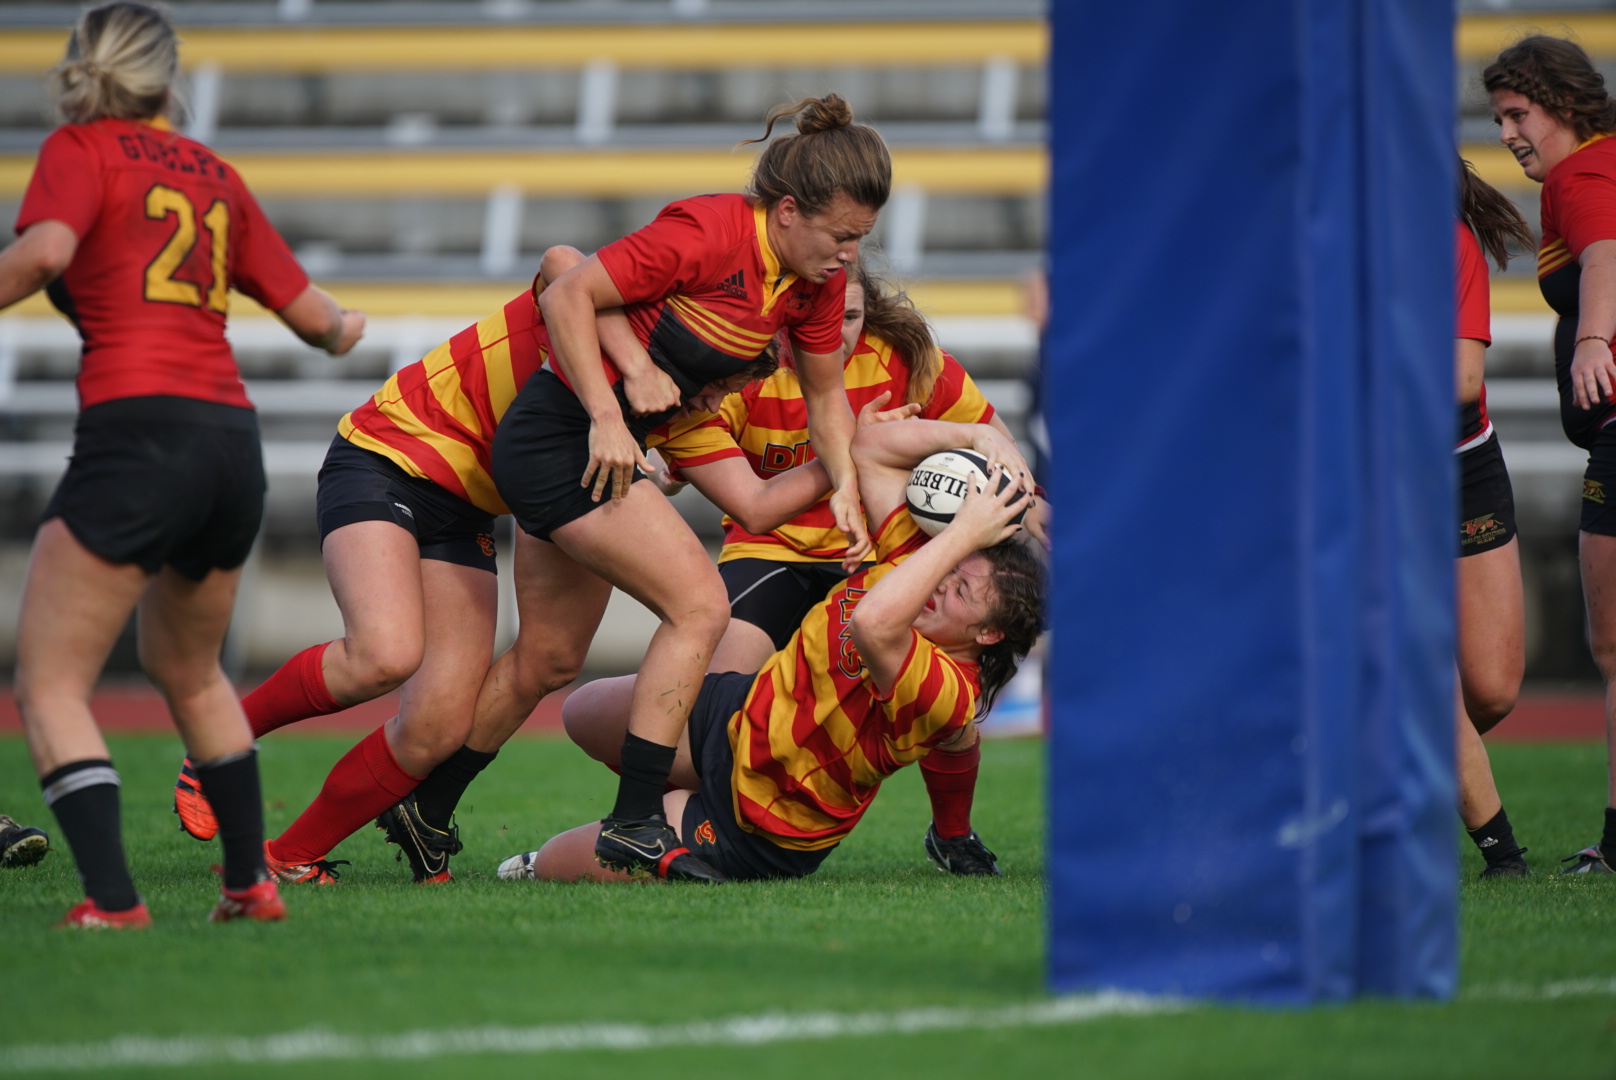 2016 women’s rugby championship BRONZE: Dinos beat Gryphons, take home bronze from first trip to nationals